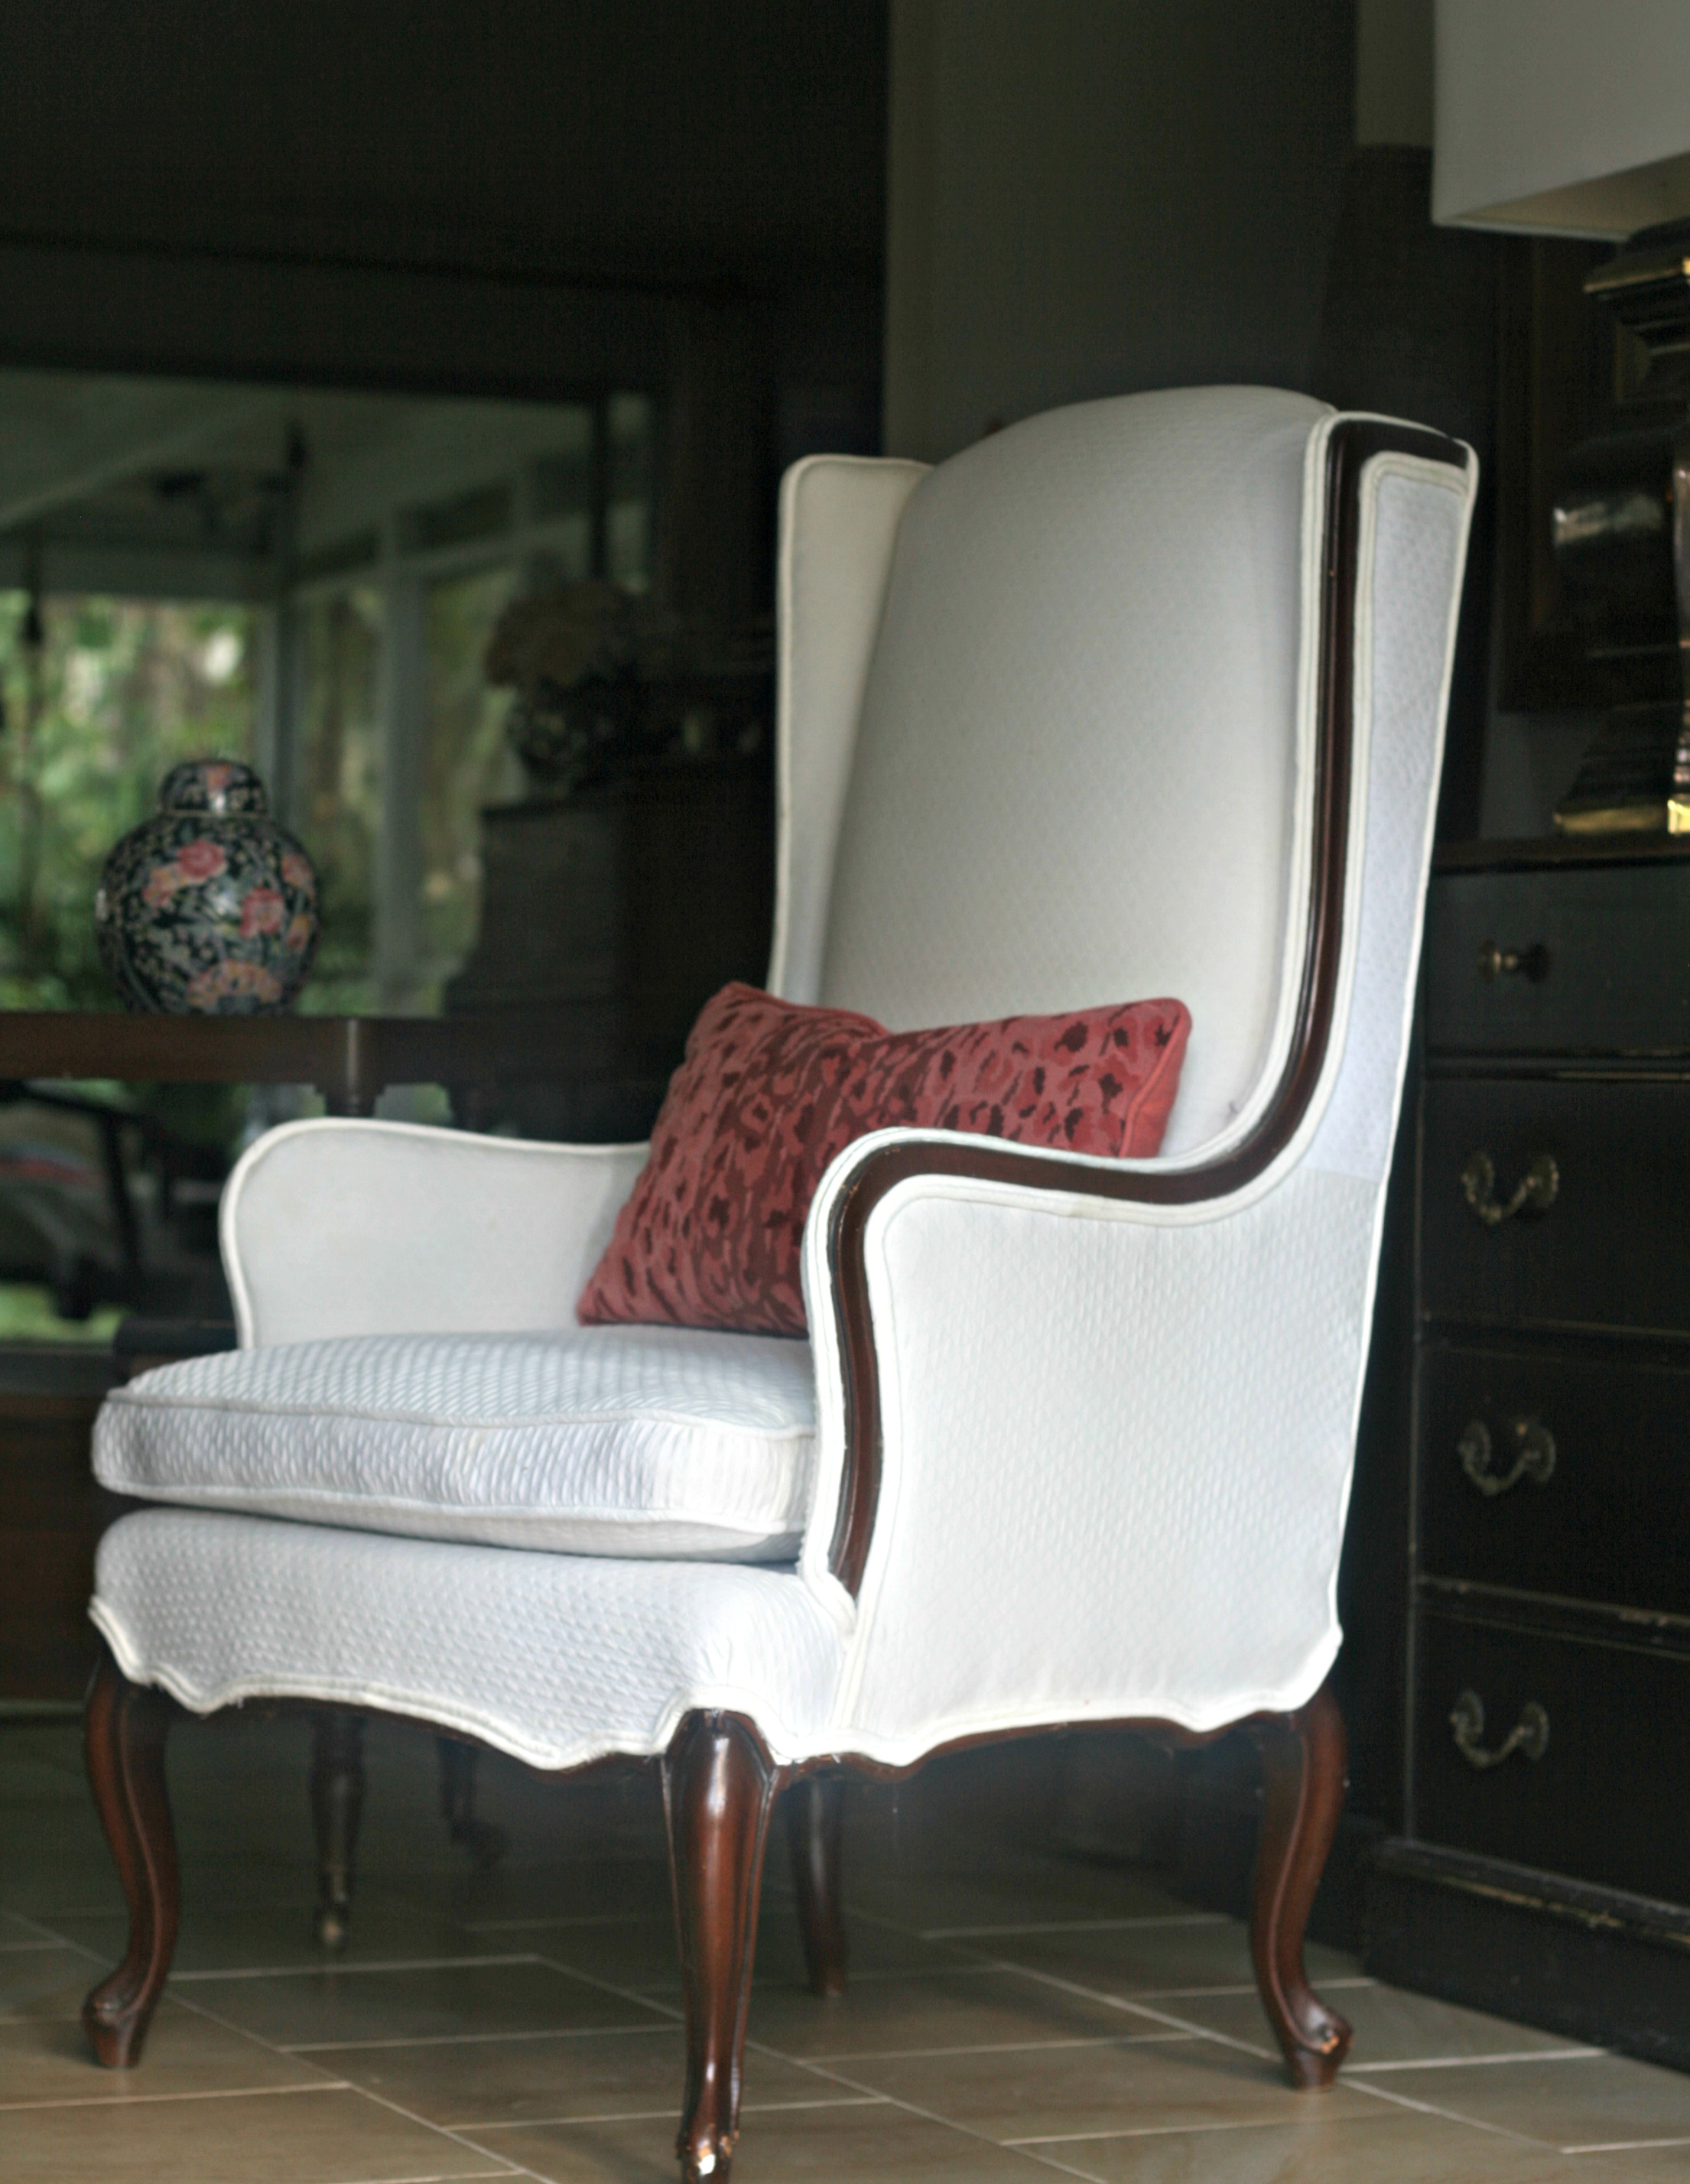 The easiest style chair to reupholster and how to make double welt.